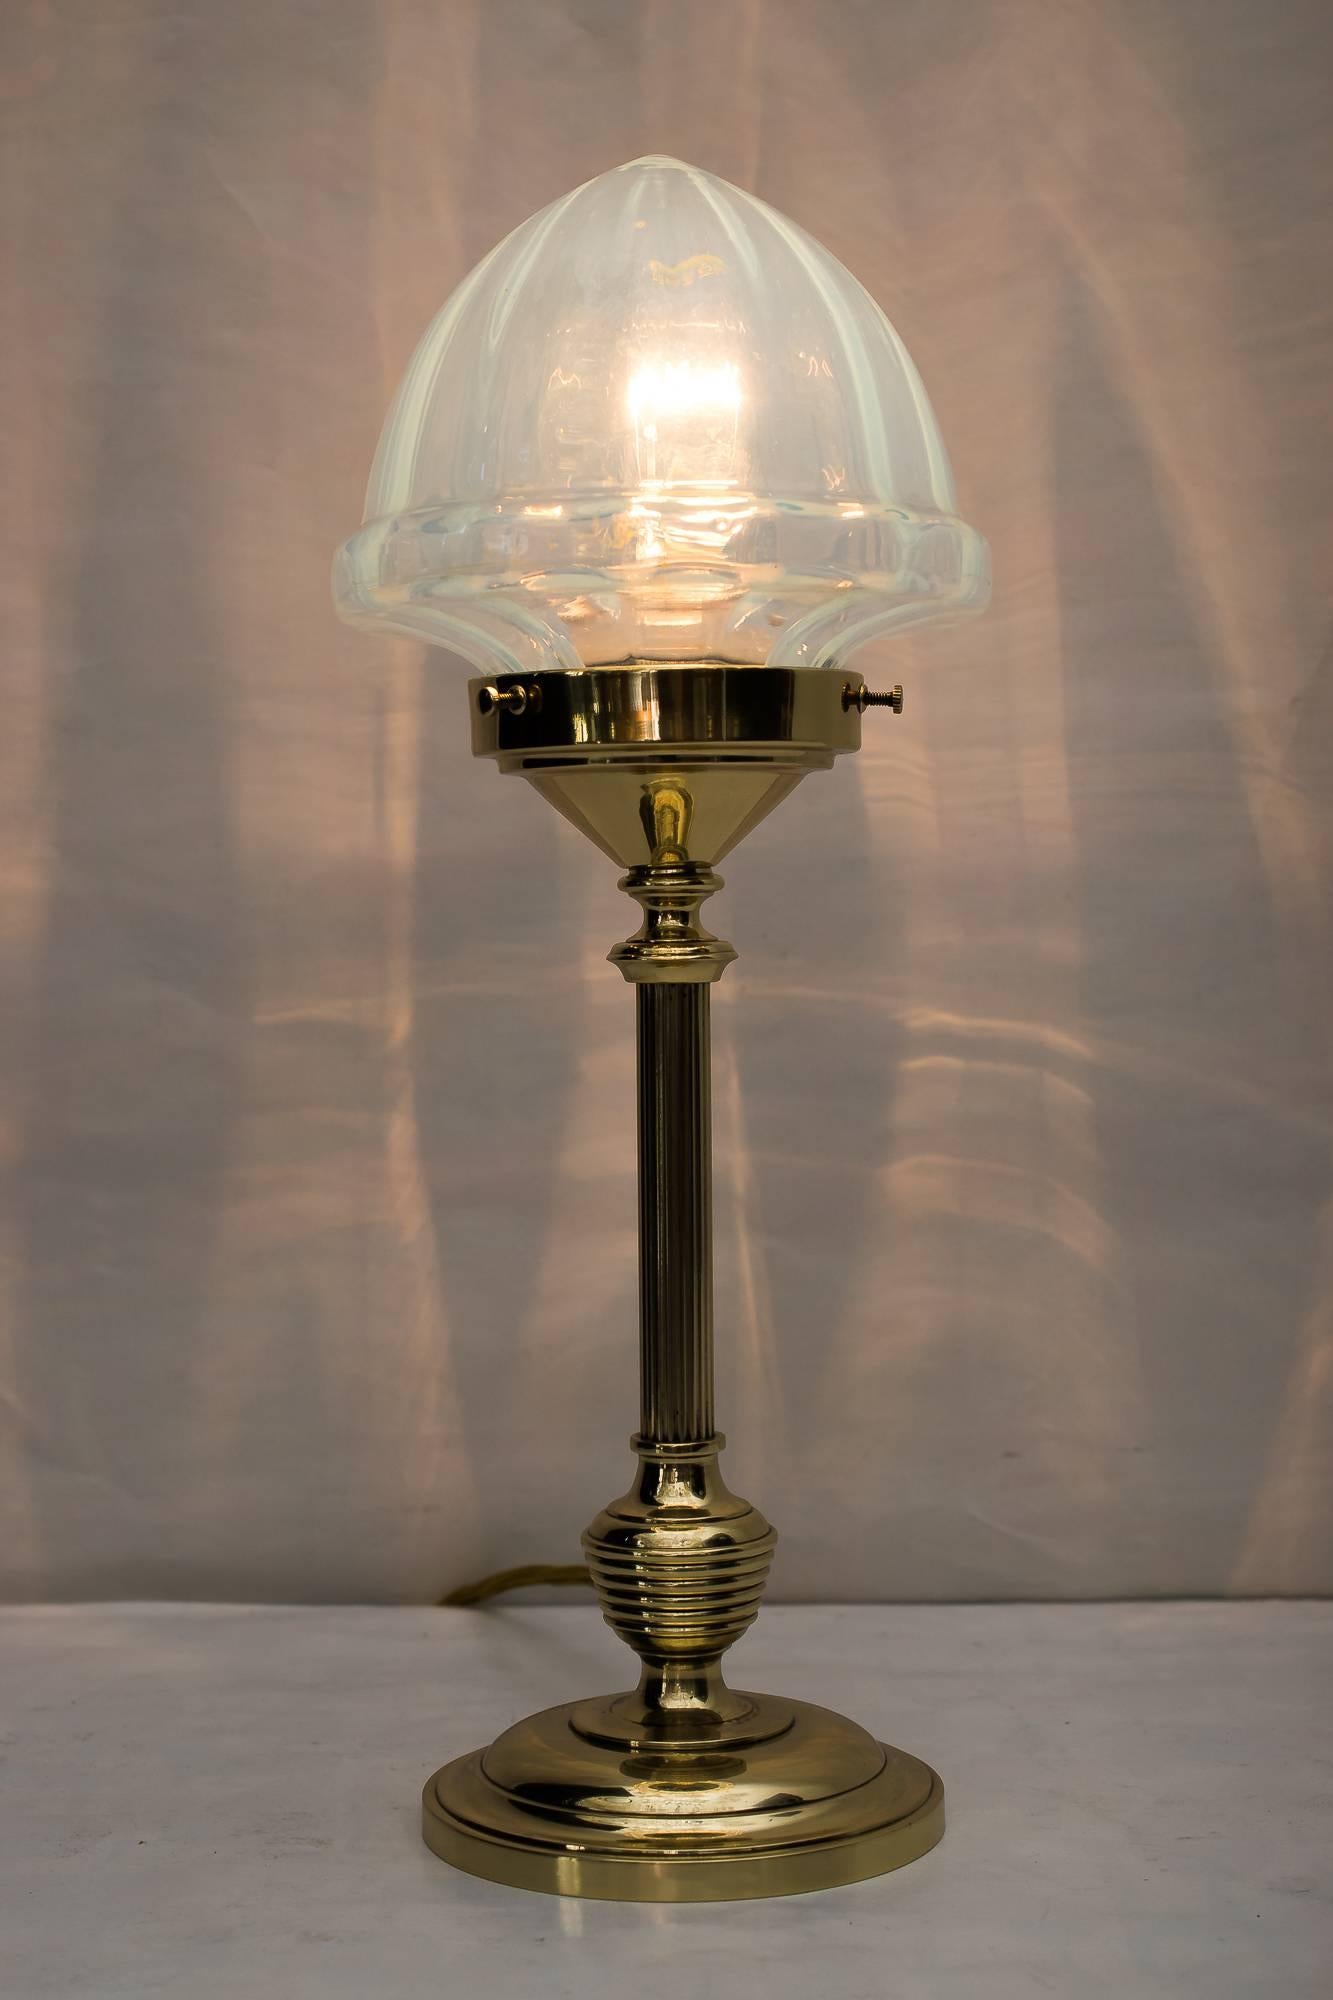 Art Deco table lamp with opaline glass shade
Polished and stove enamelled.